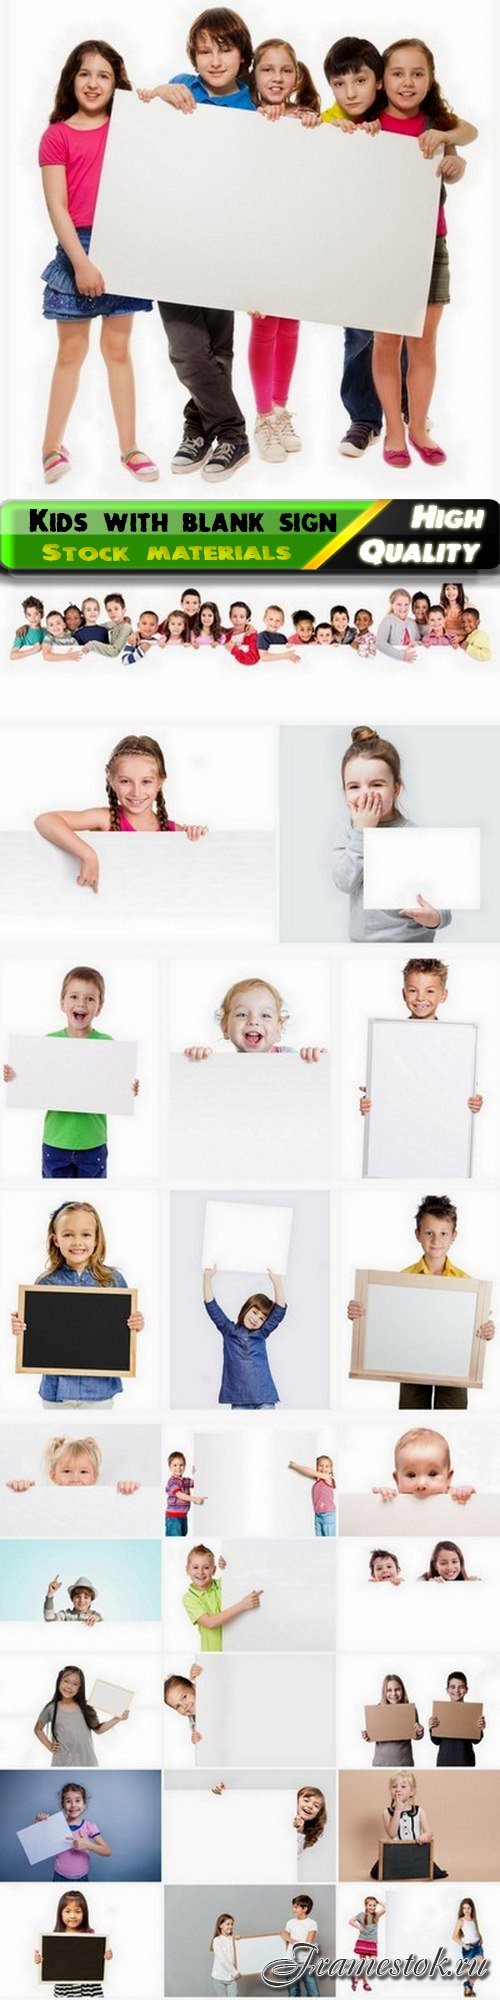 Happy kids and children with blank sign for your advertising 25 Jpg